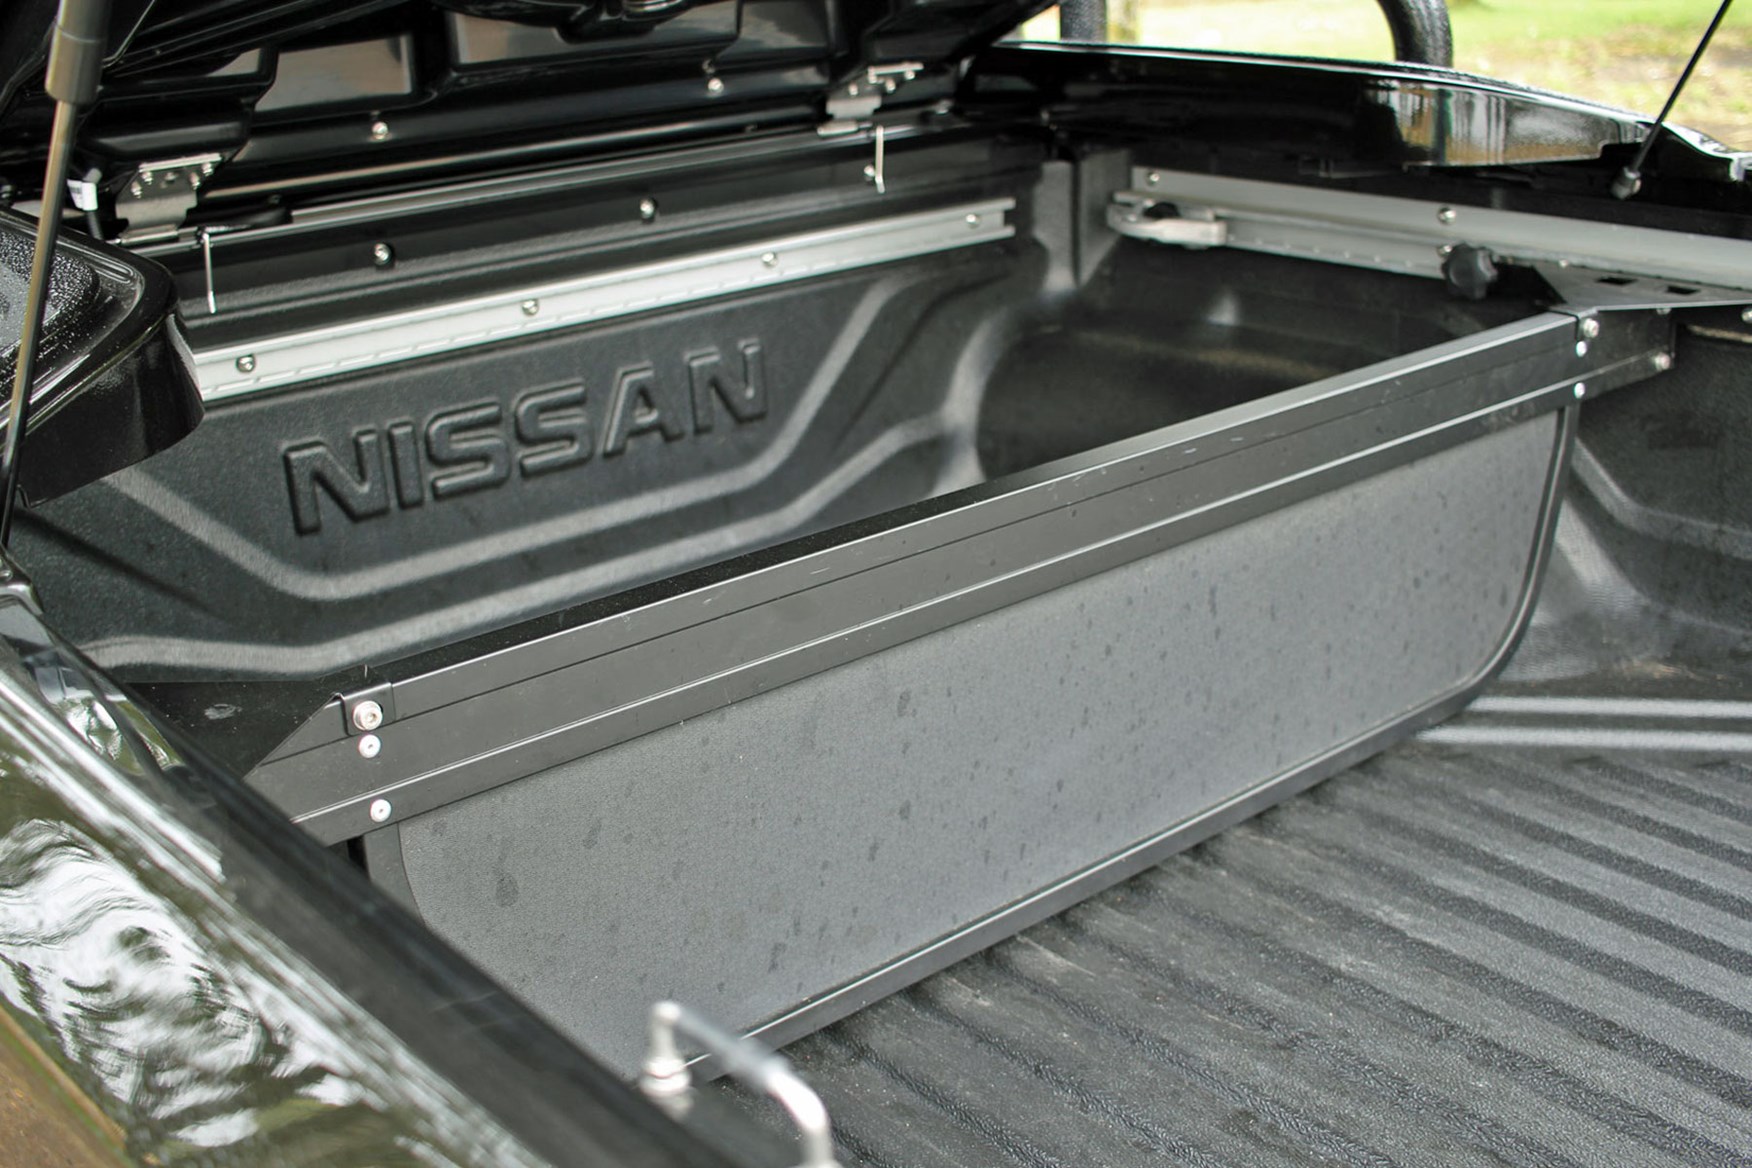 Nissan Navara Trek-1 review - load area with divider and liner